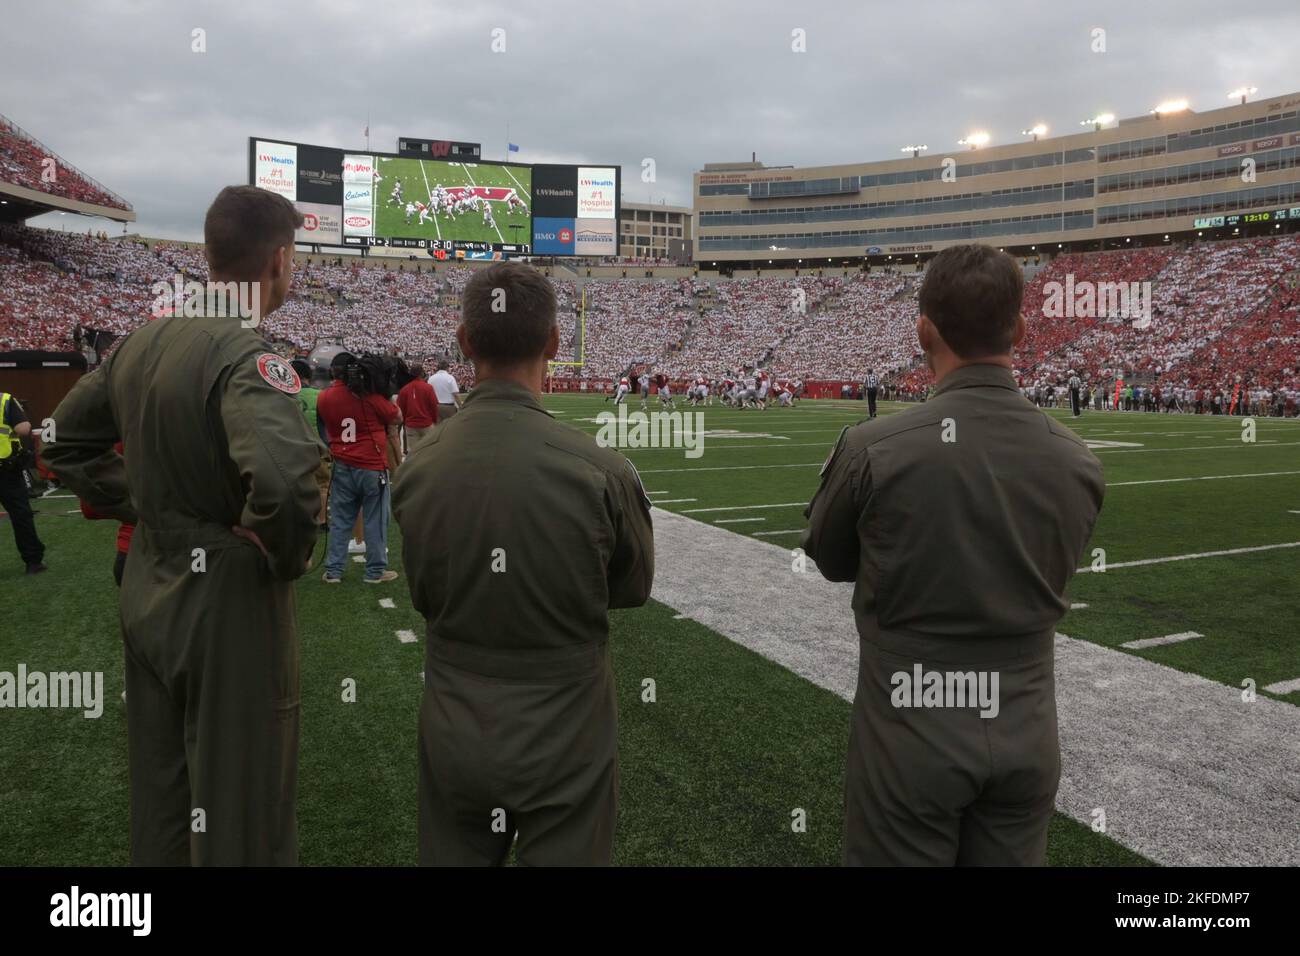 Pilots assigned to the 115th Fighter Wing take part in a flyover during a Wisconsin Badger’s football game Sept 10, 2022 at Camp Randall Stadium in Madison, Wisconsin. This is the last F-16 Badger Flyover for the 115th as the wing begins the transition from the F-16 Fighting Falcon aircraft to the F-35 Lighting II aircraft. Stock Photo